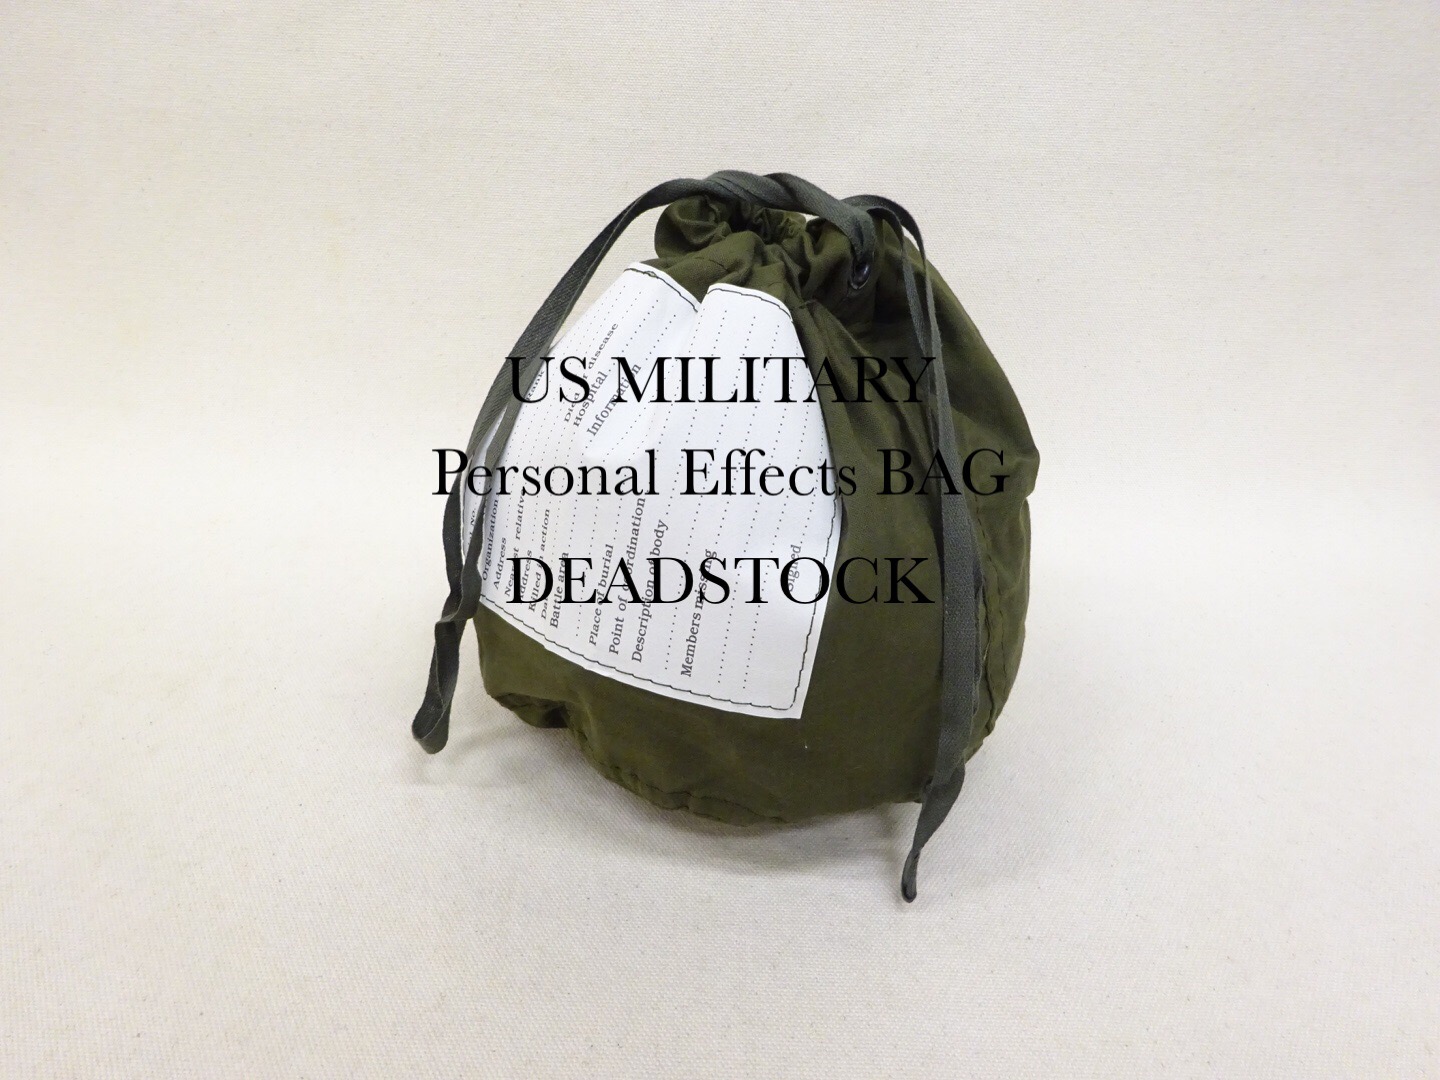 usarmy-personal-effects-bag-20211121-1